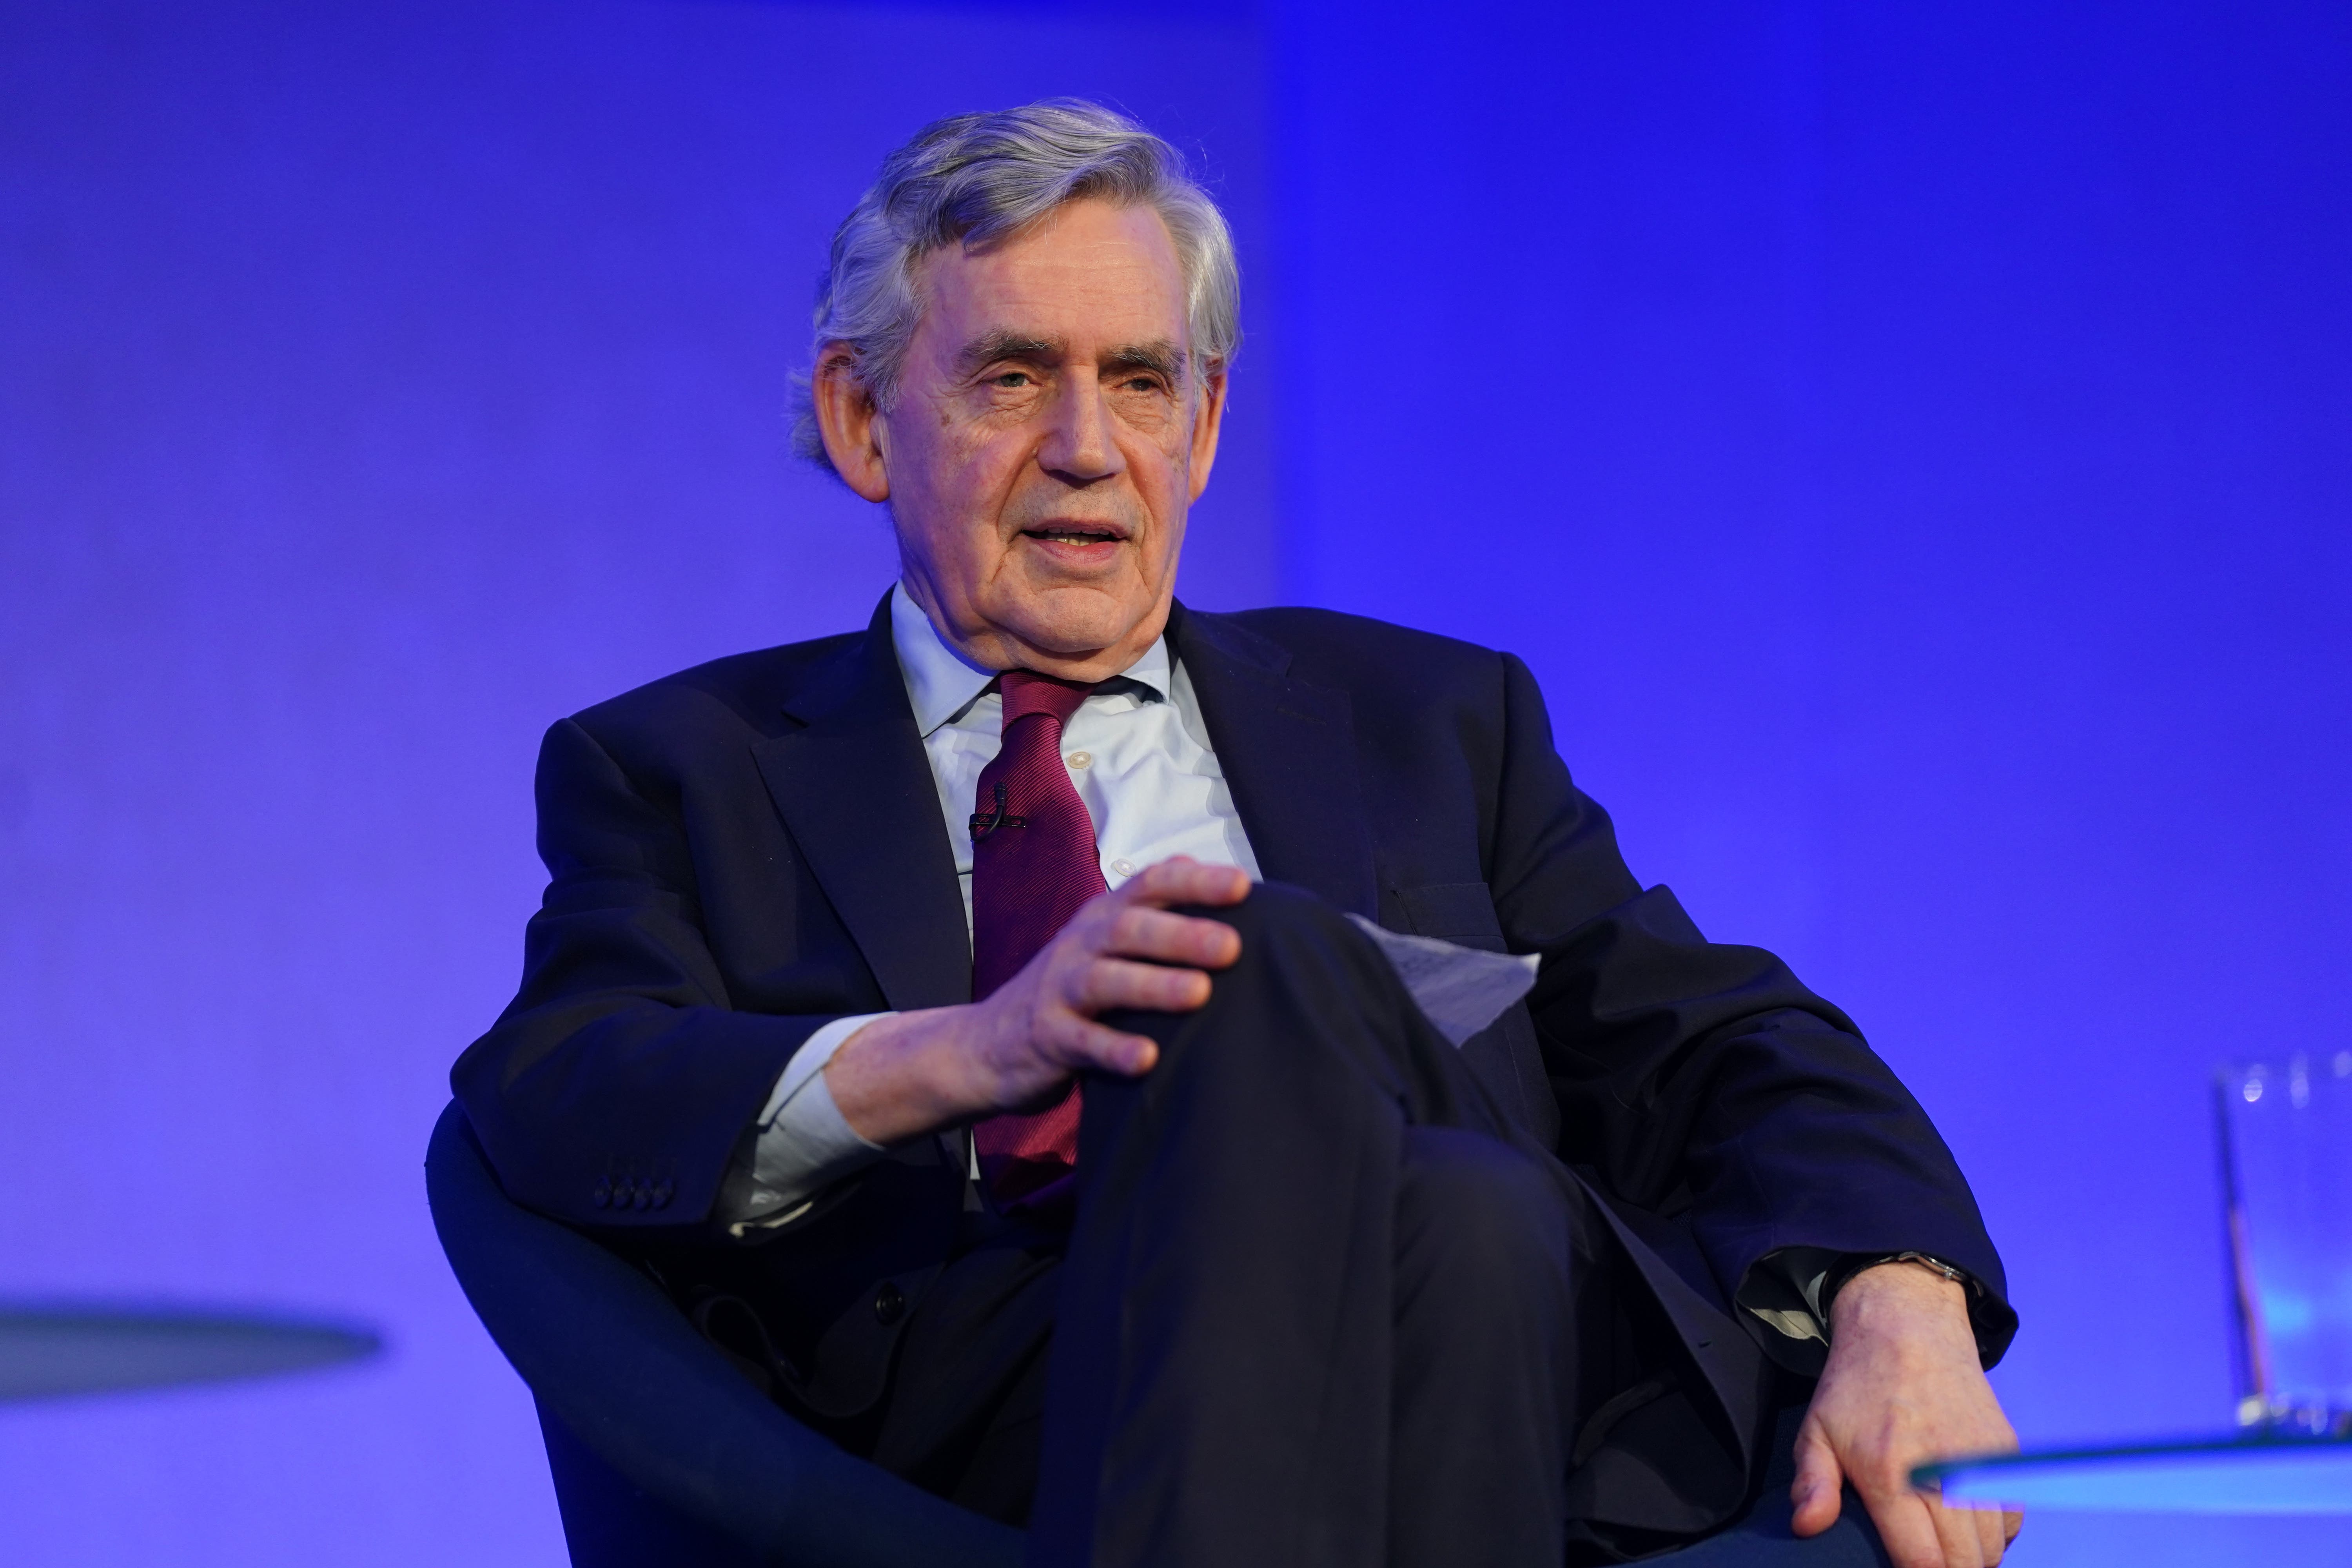 Former Prime Minister Gordon Brown called for tackling poverty (Lucy North/PA)